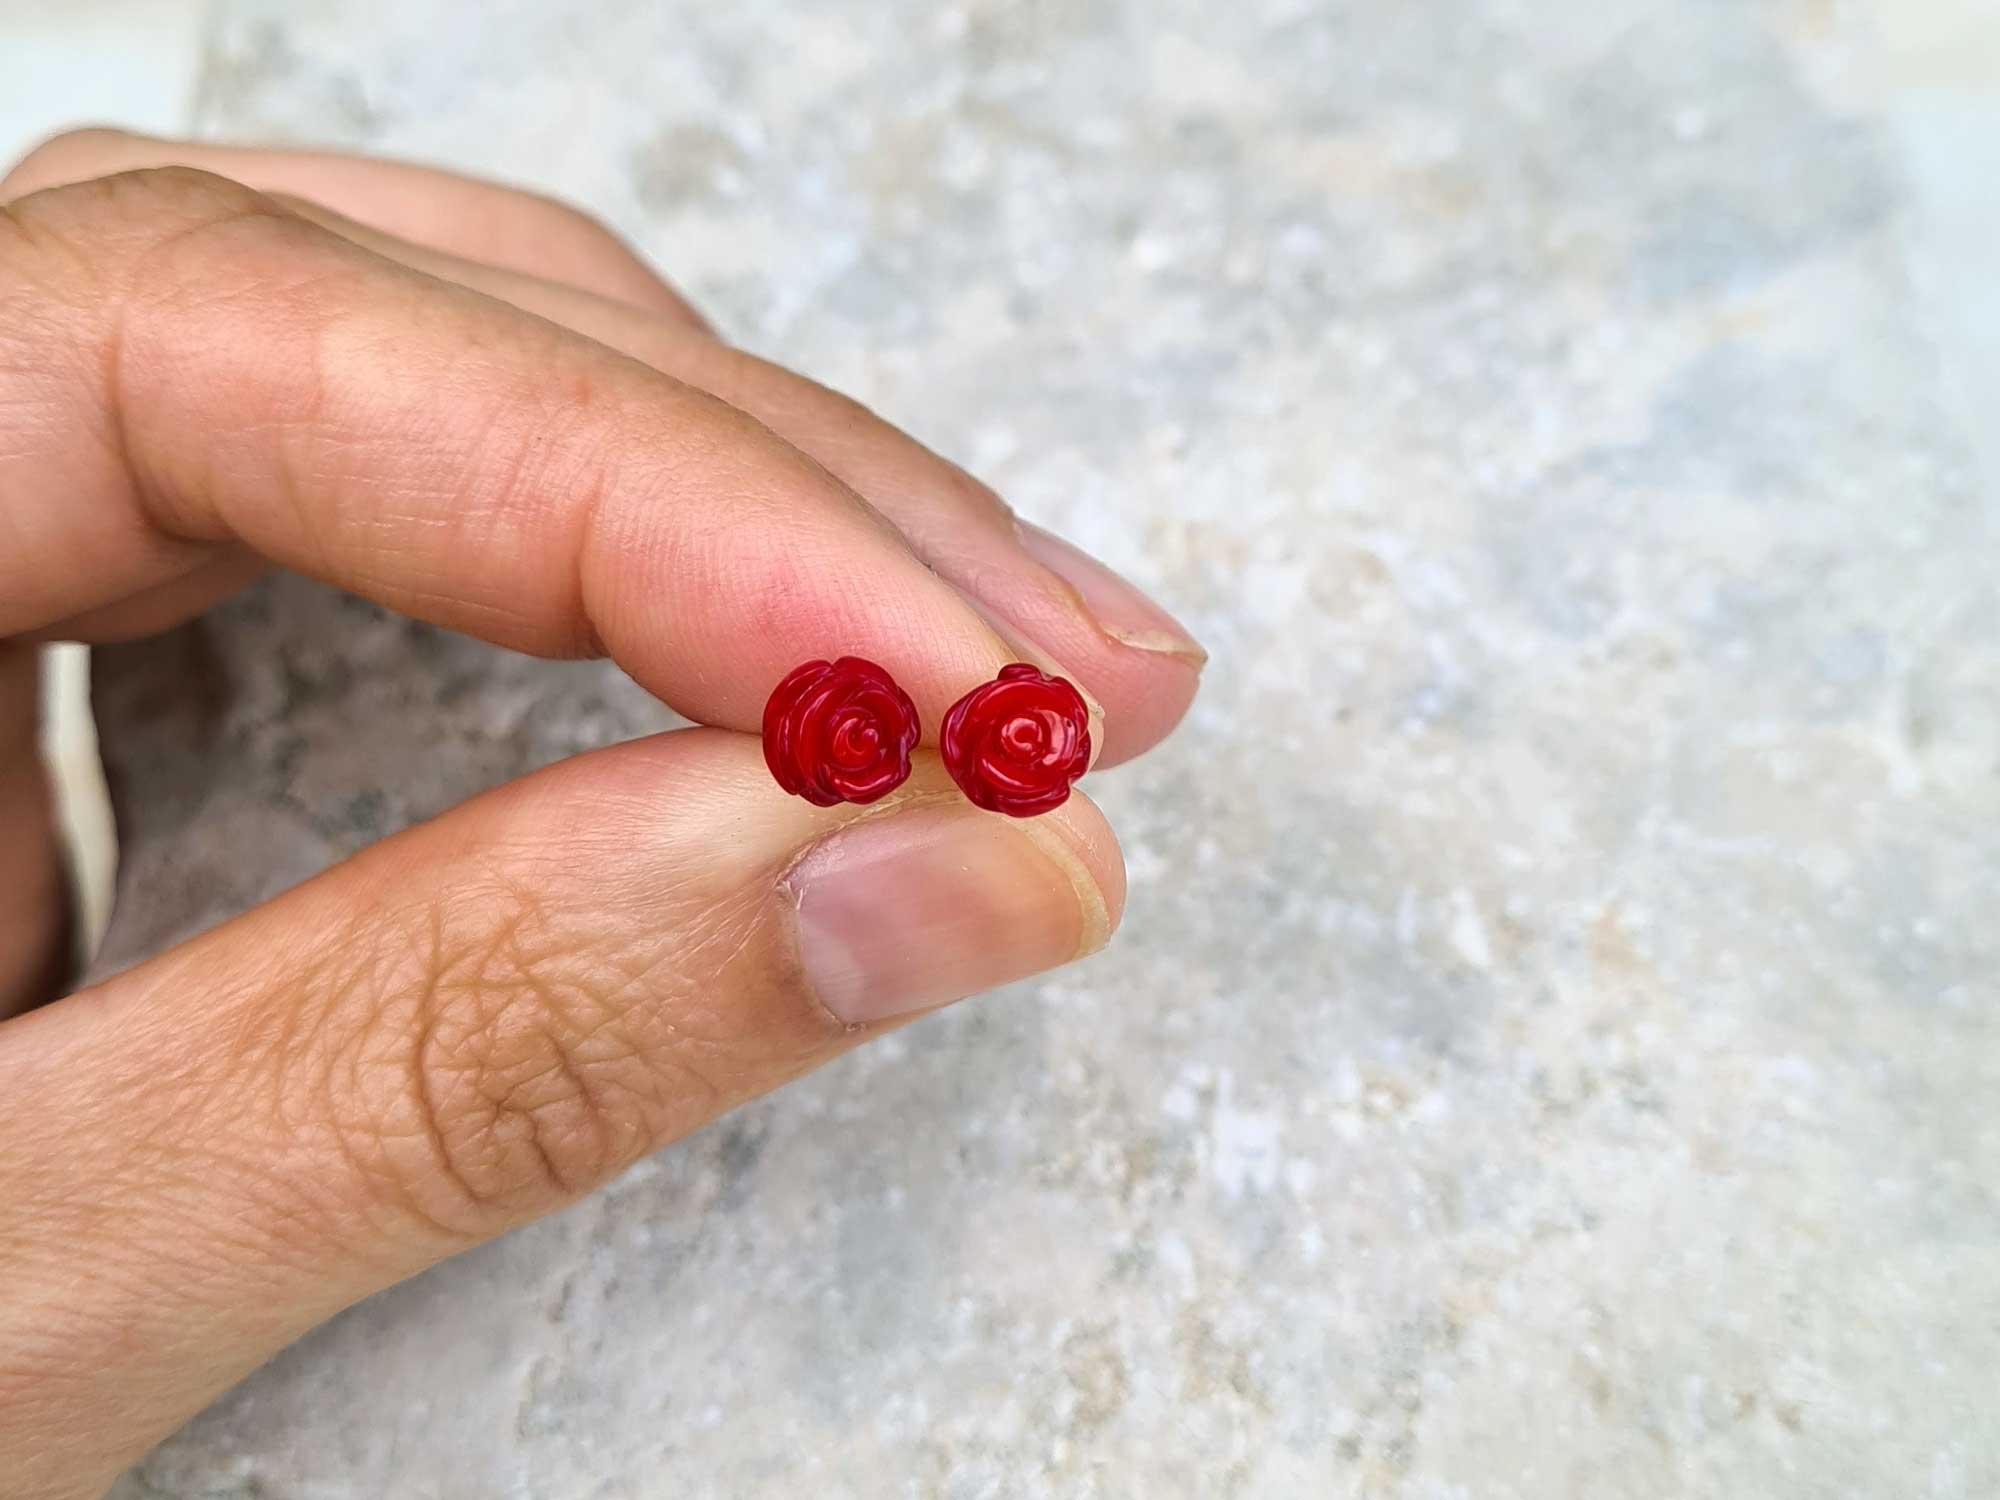 Red Coral, Tiny coral studs, Rose shape, Women's earrings, 2000x1500 HD Desktop